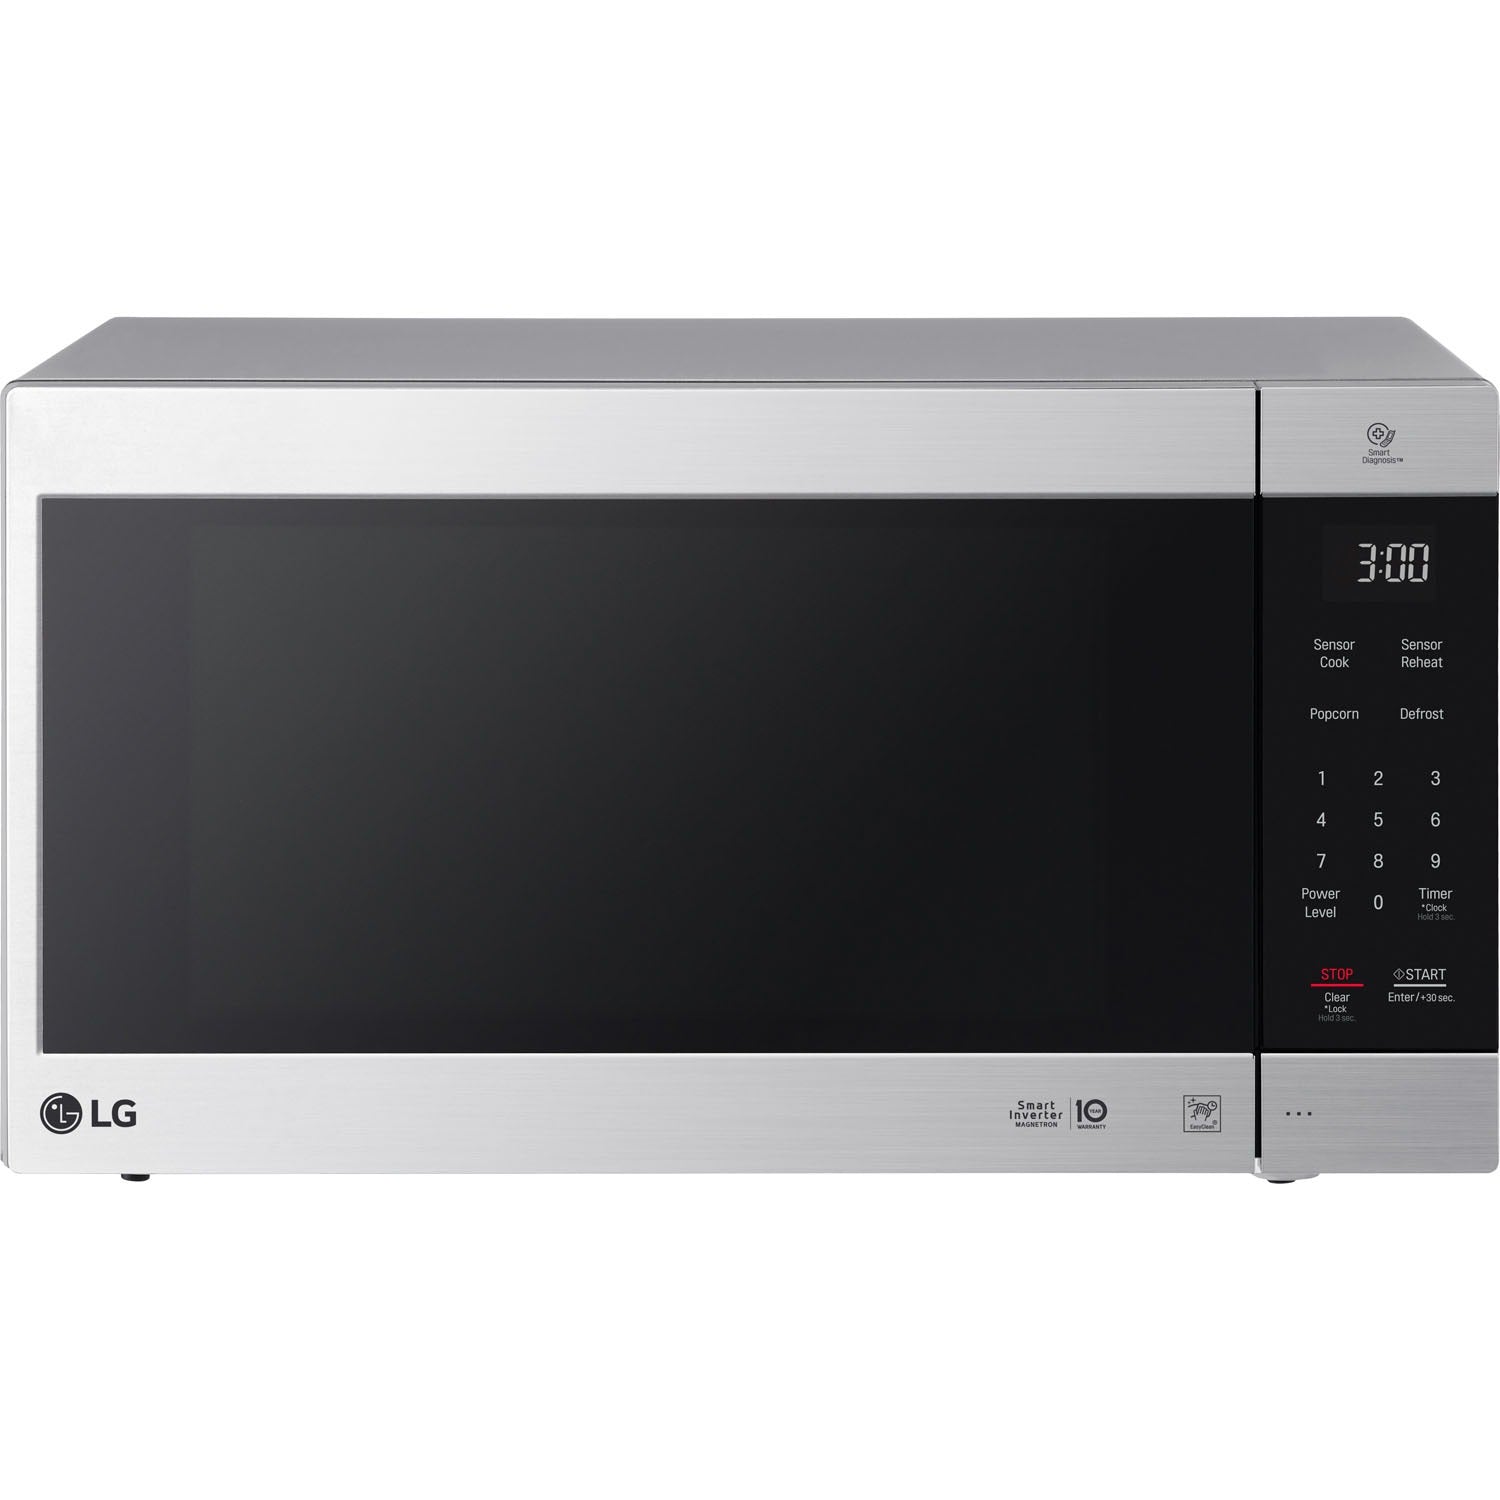 LG 24 in. NeoChef 2 Cu. Ft. 1200W Countertop Microwave in Stainless Steel (LMC2075ST)